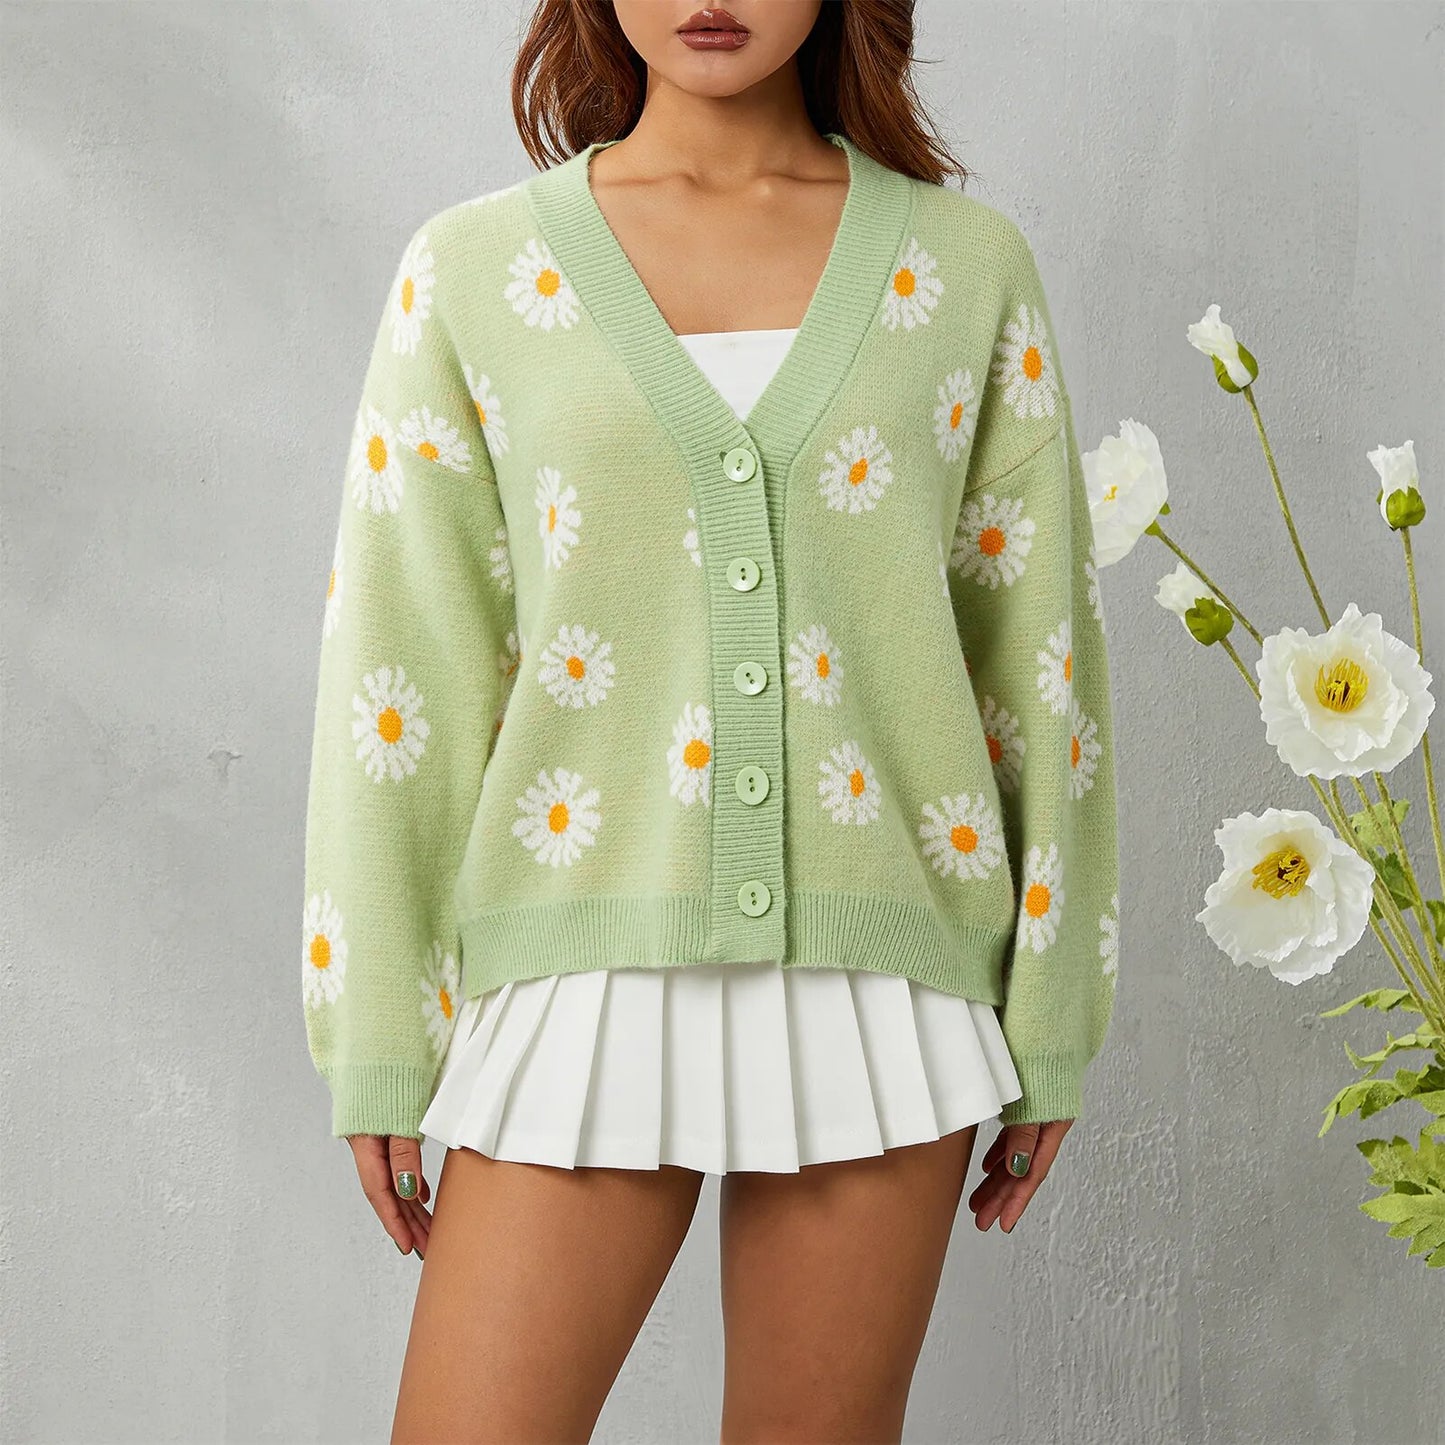 Sweater Open Front Cardigan Long Sleeve Women Floral Print Cardigan Daisy